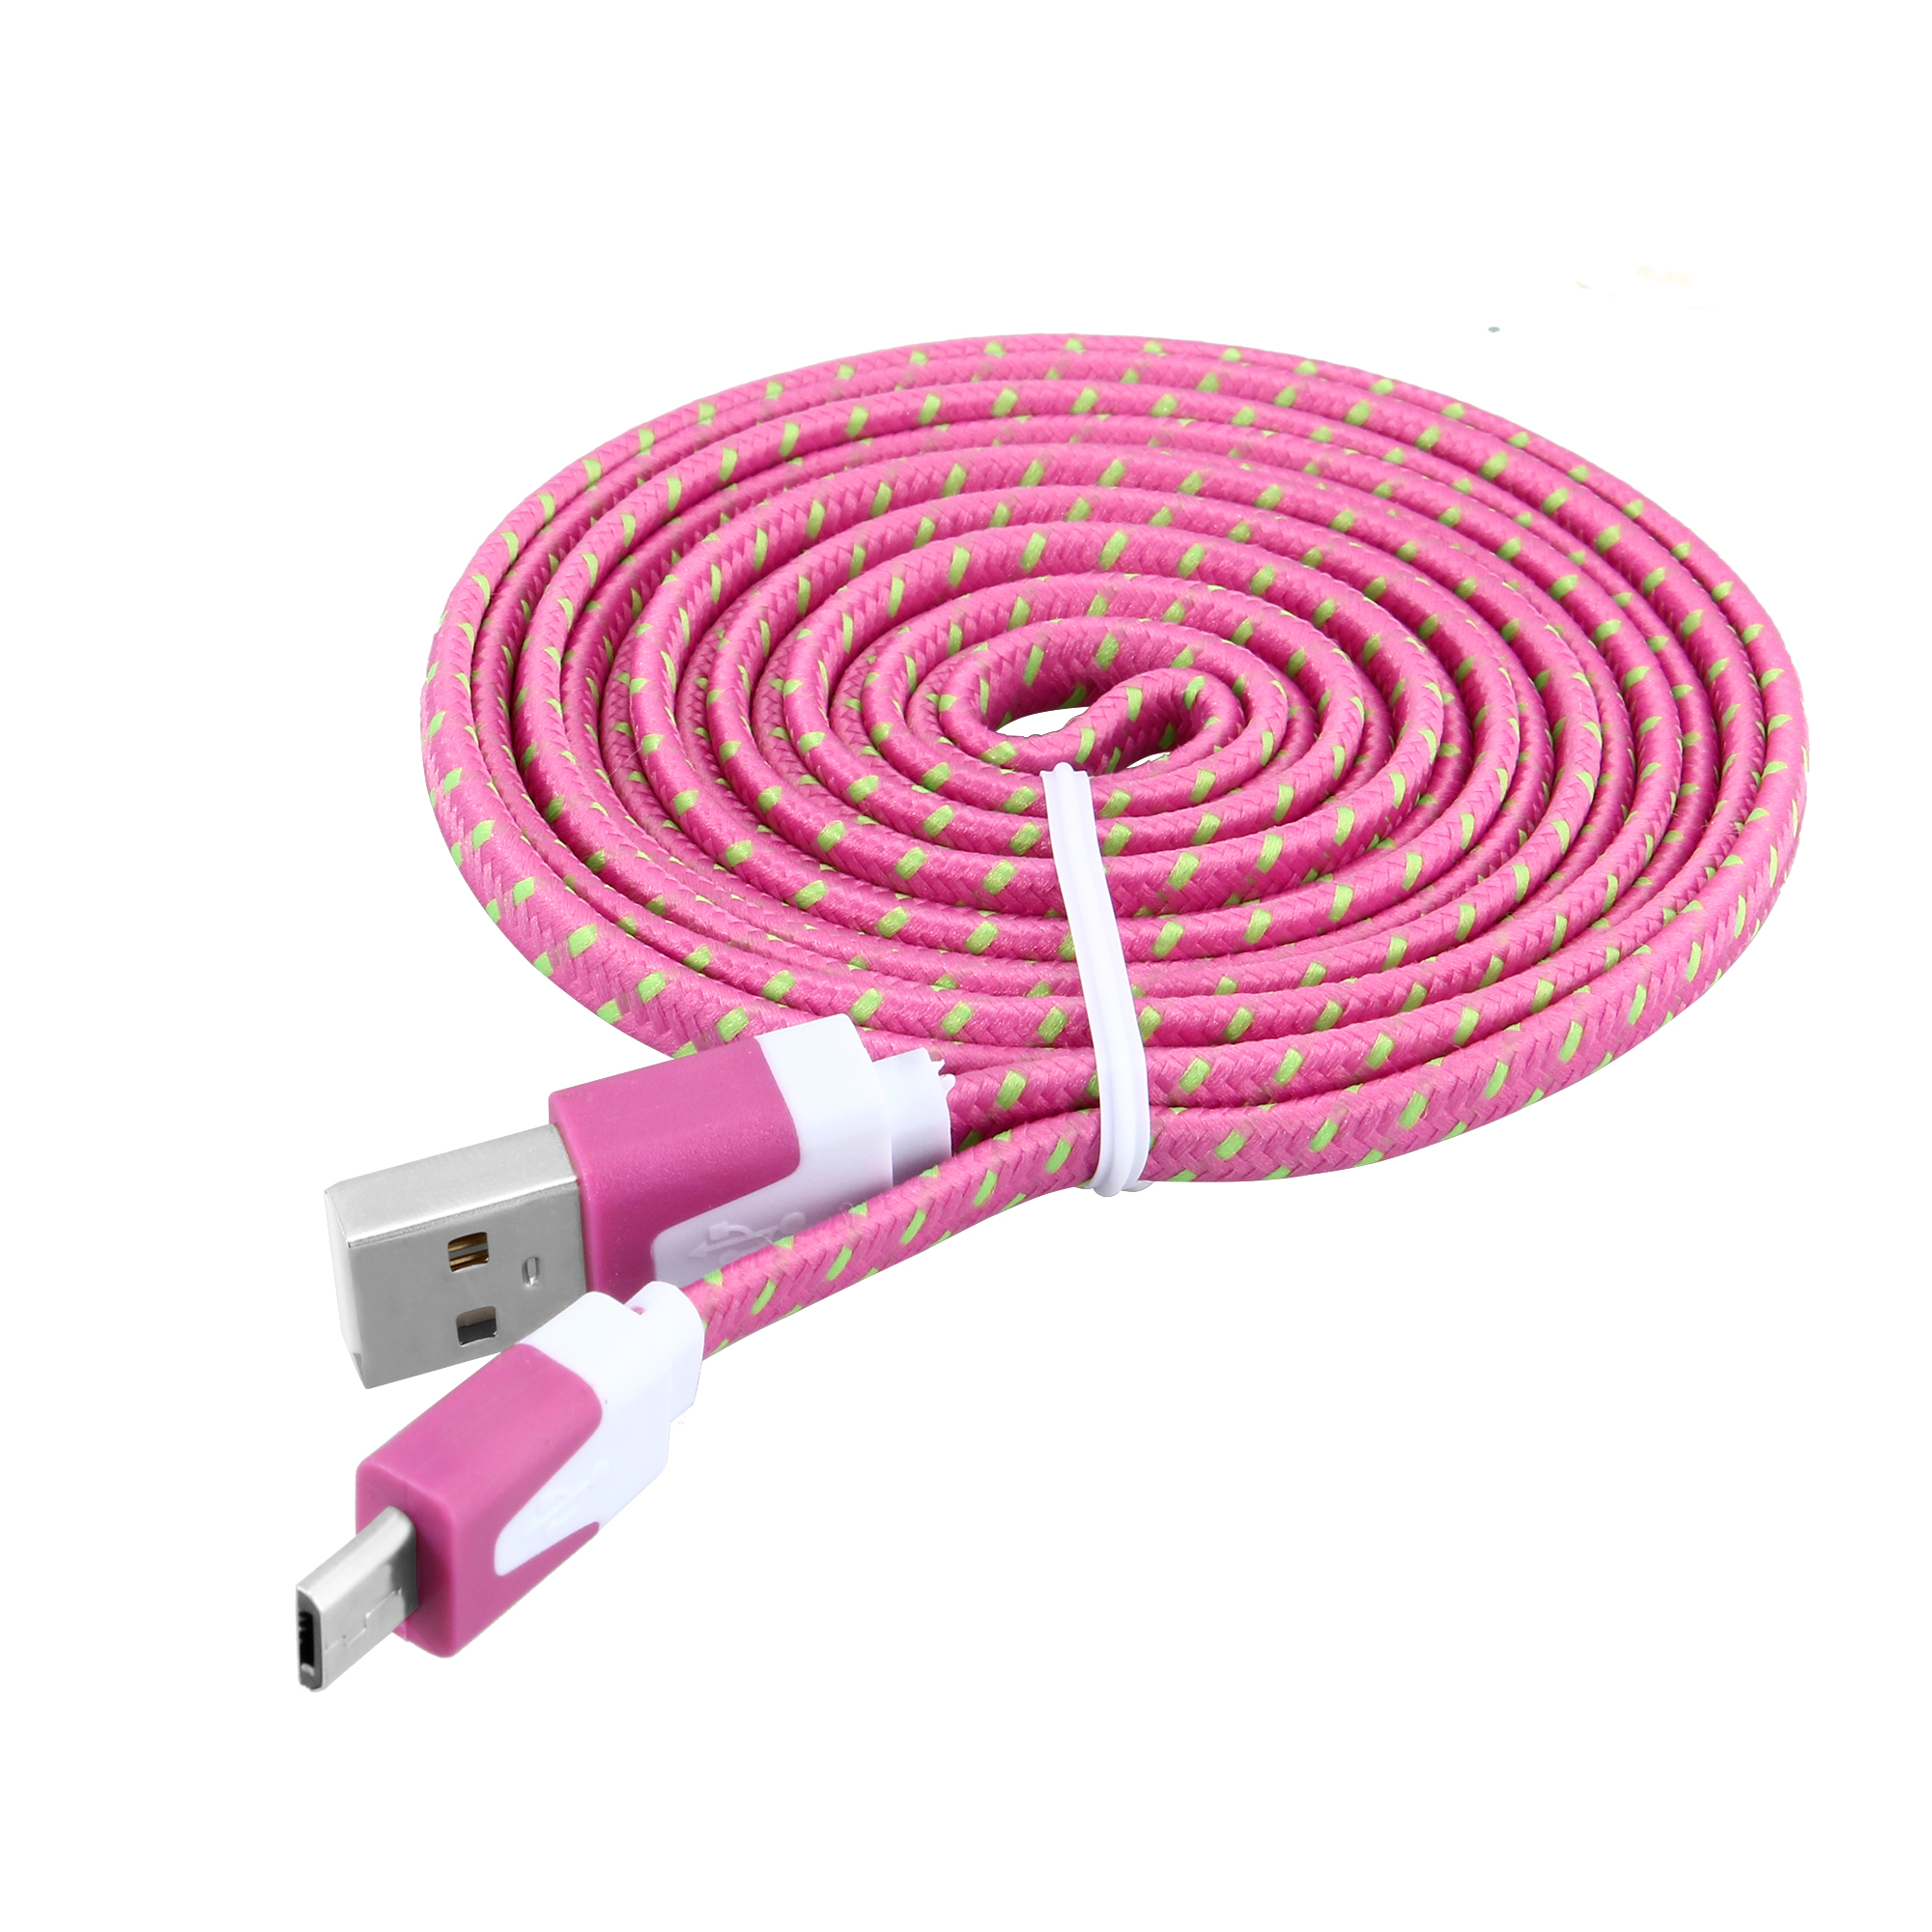 1m Weave Braid USB Data Sync Charging Cable for Samsung Android Phones - Rose Red